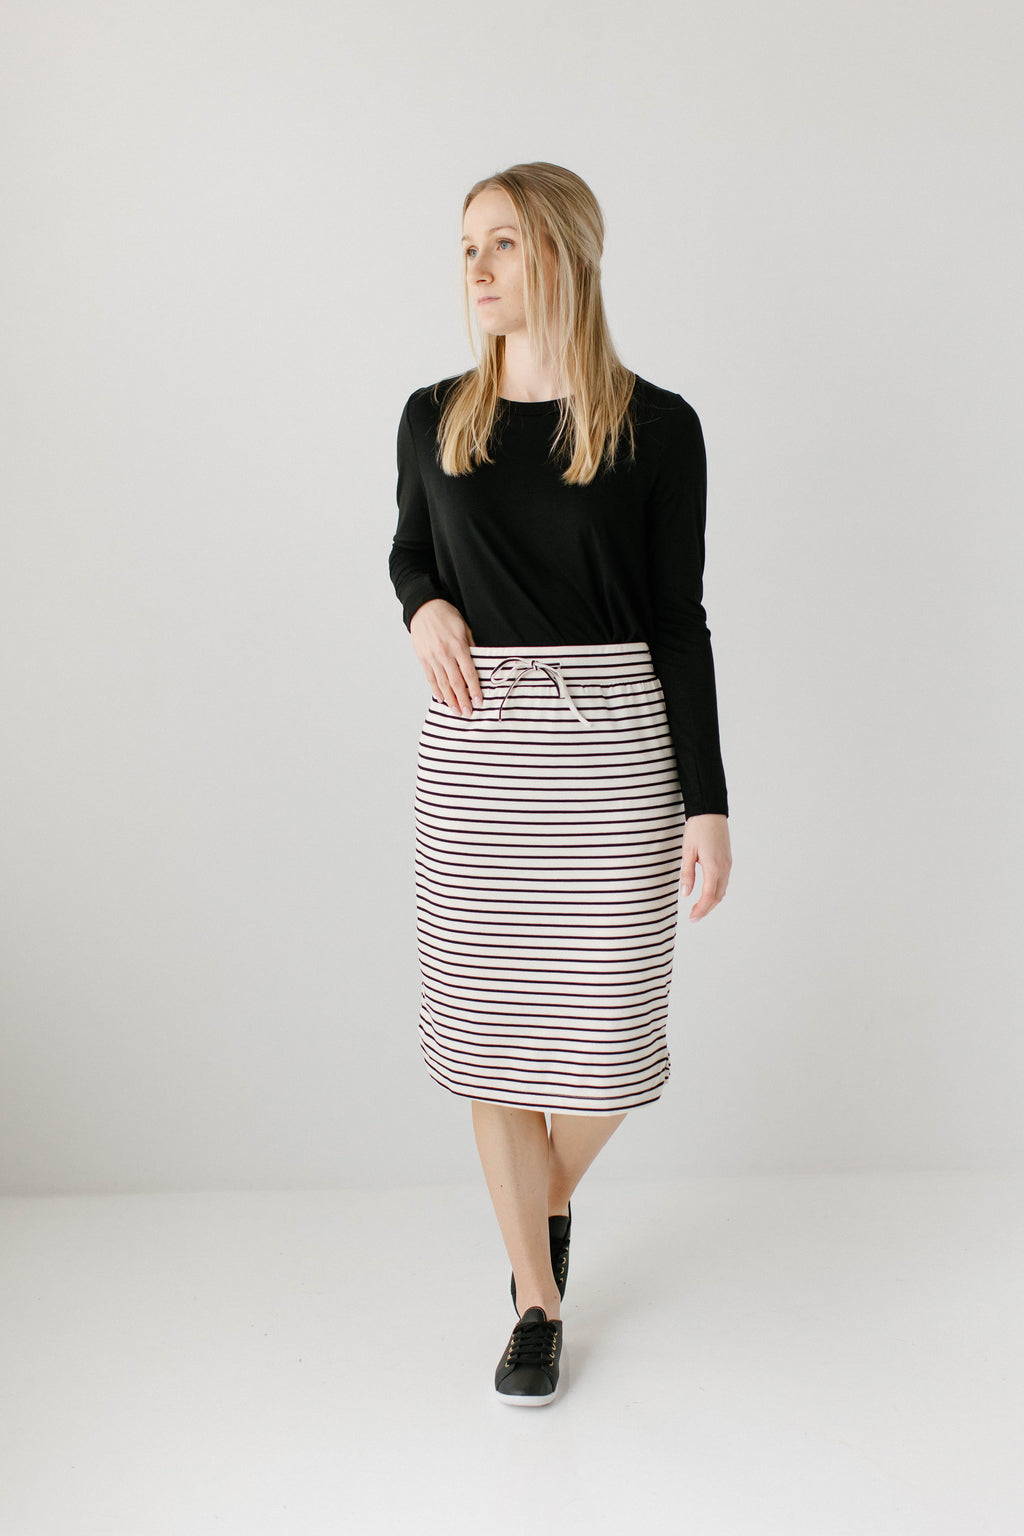 'Olivia' Skirt in Cream with Black Stripes